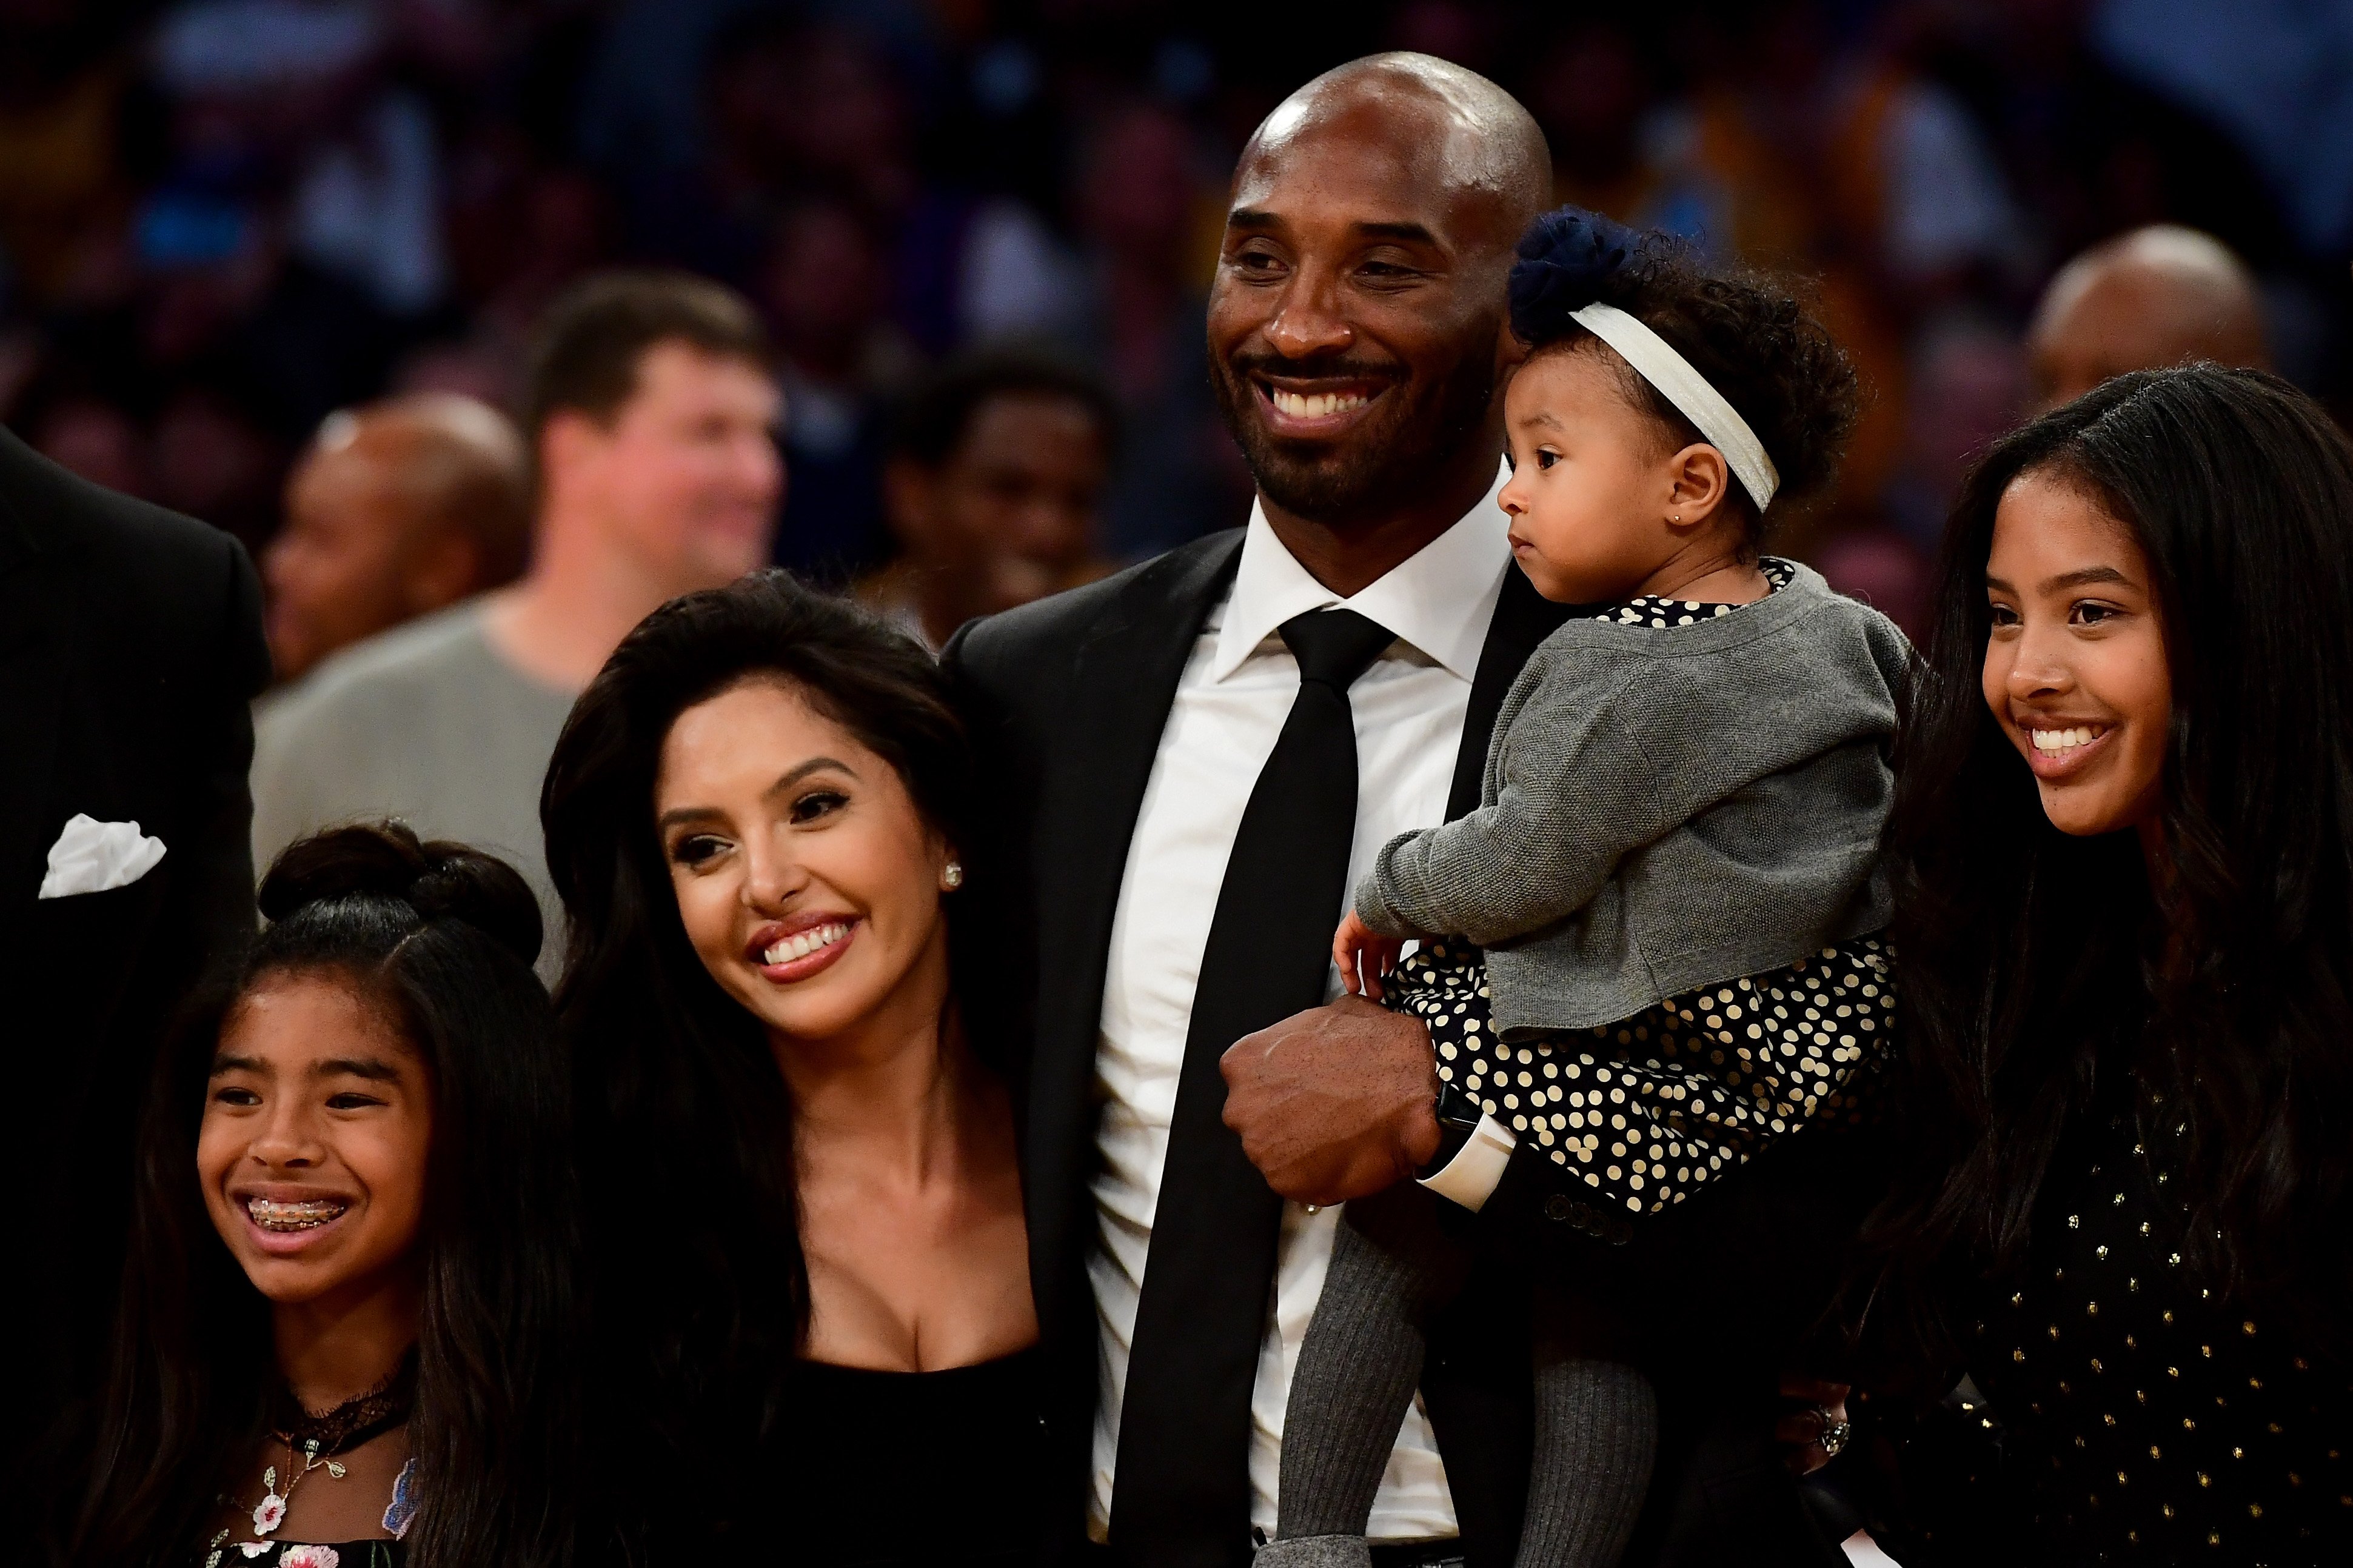 Kobe Bryant poses with wife Vanessa and daughters after his Lakers jerseys are retired